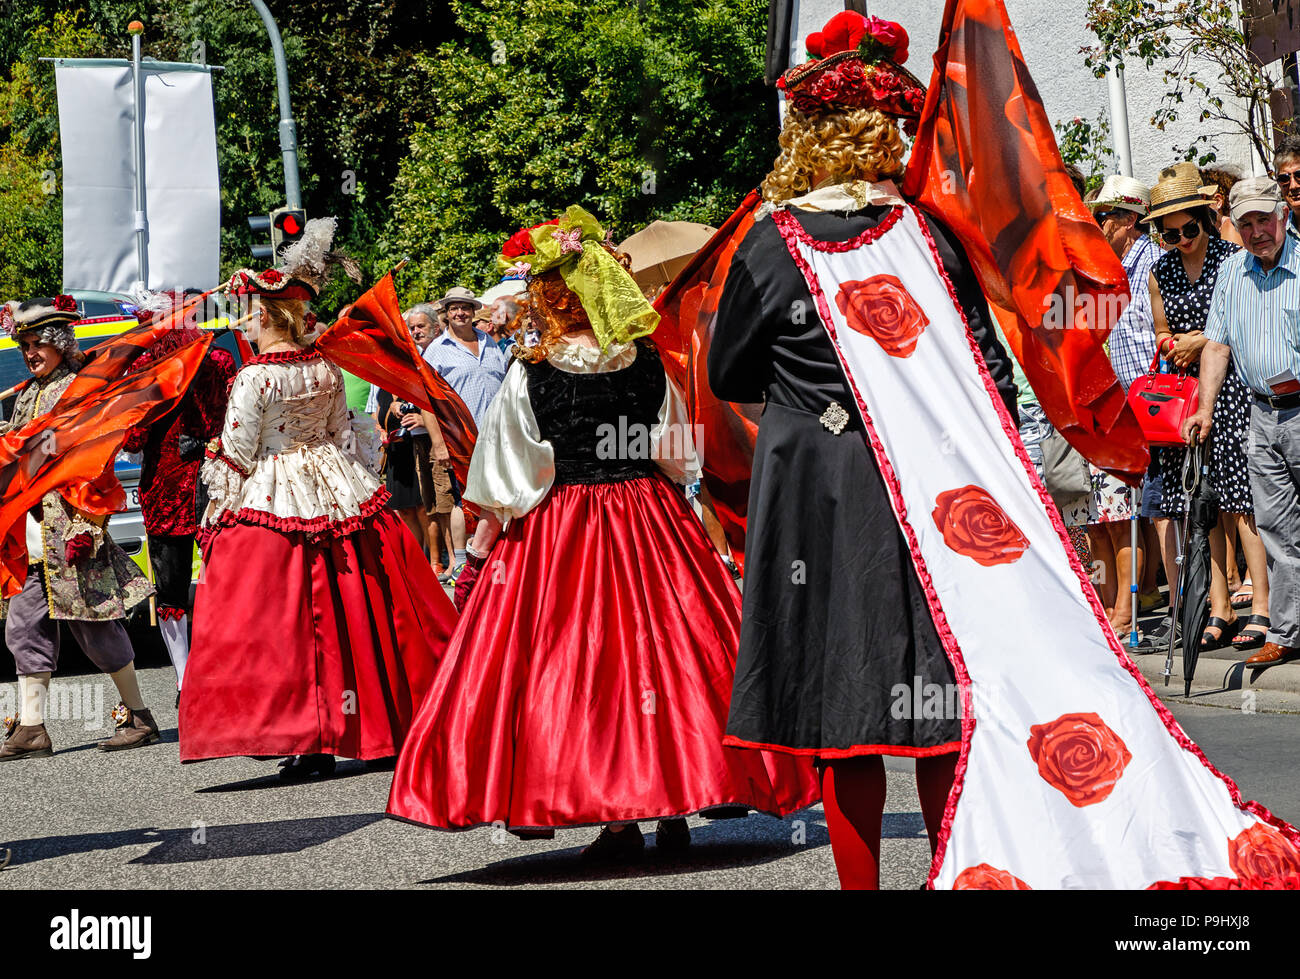 STEINFURTH, GERMANY-JULY 15, 2018: Traditional Rose festival in Bad Nauheim suburb Steinfurth, the oldest rose village in Germany. Stock Photo